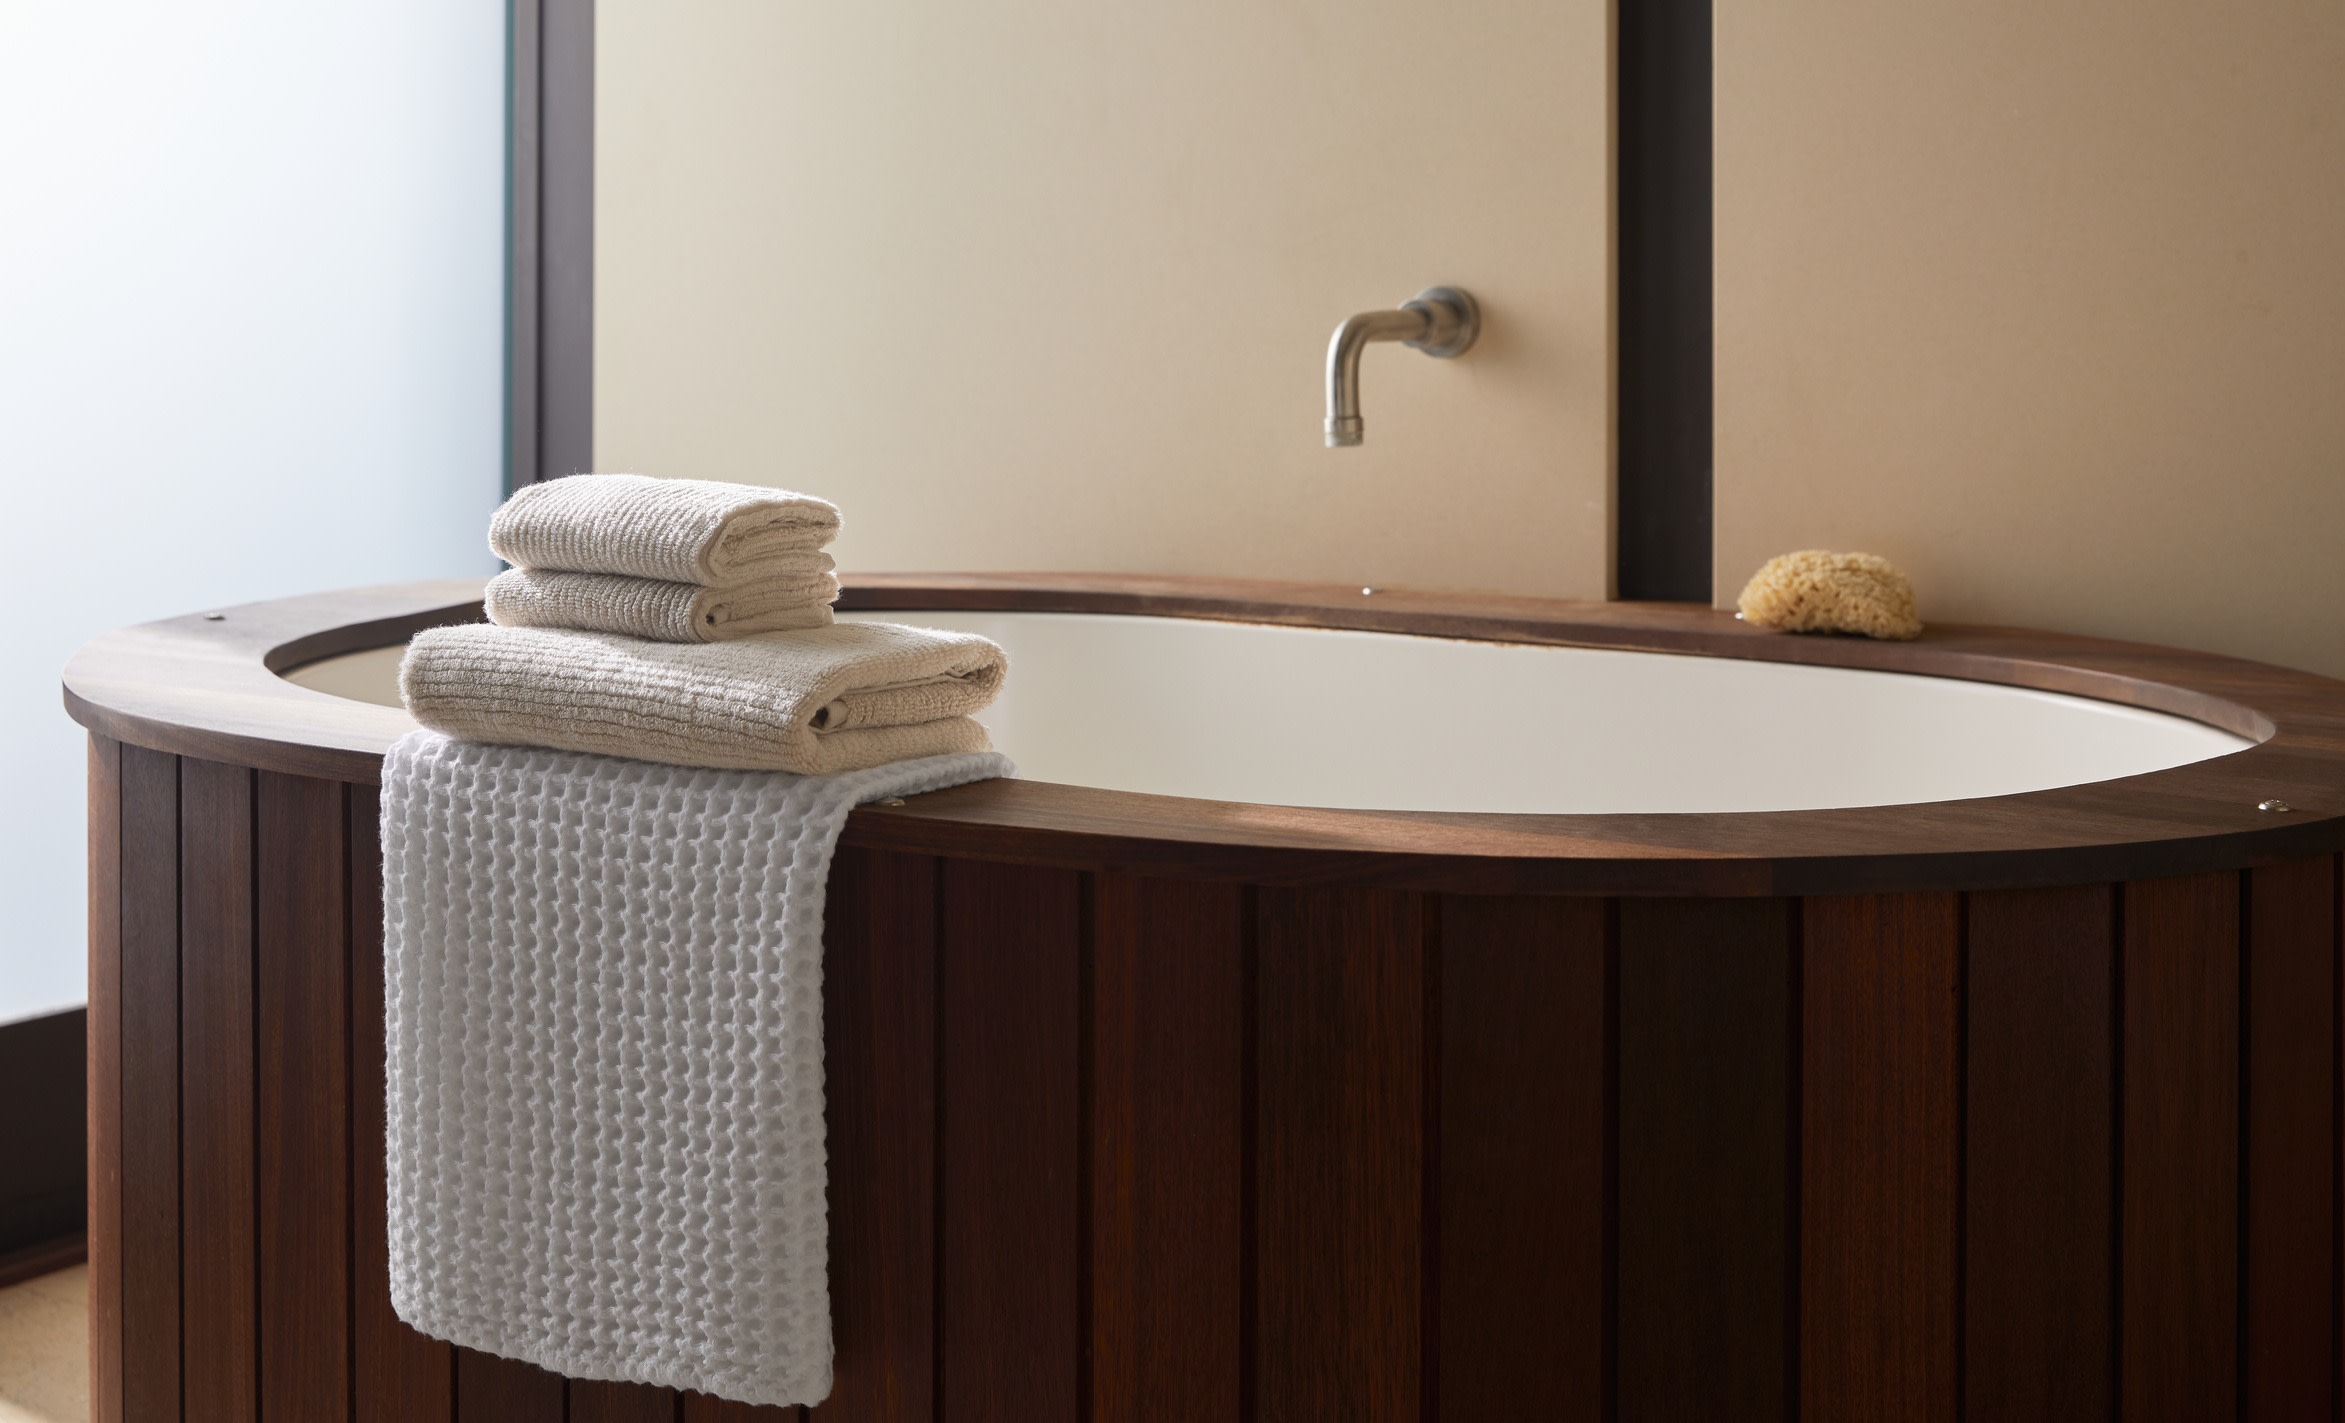 A wood-paneled bathtub with towels stacked neatly on the edge